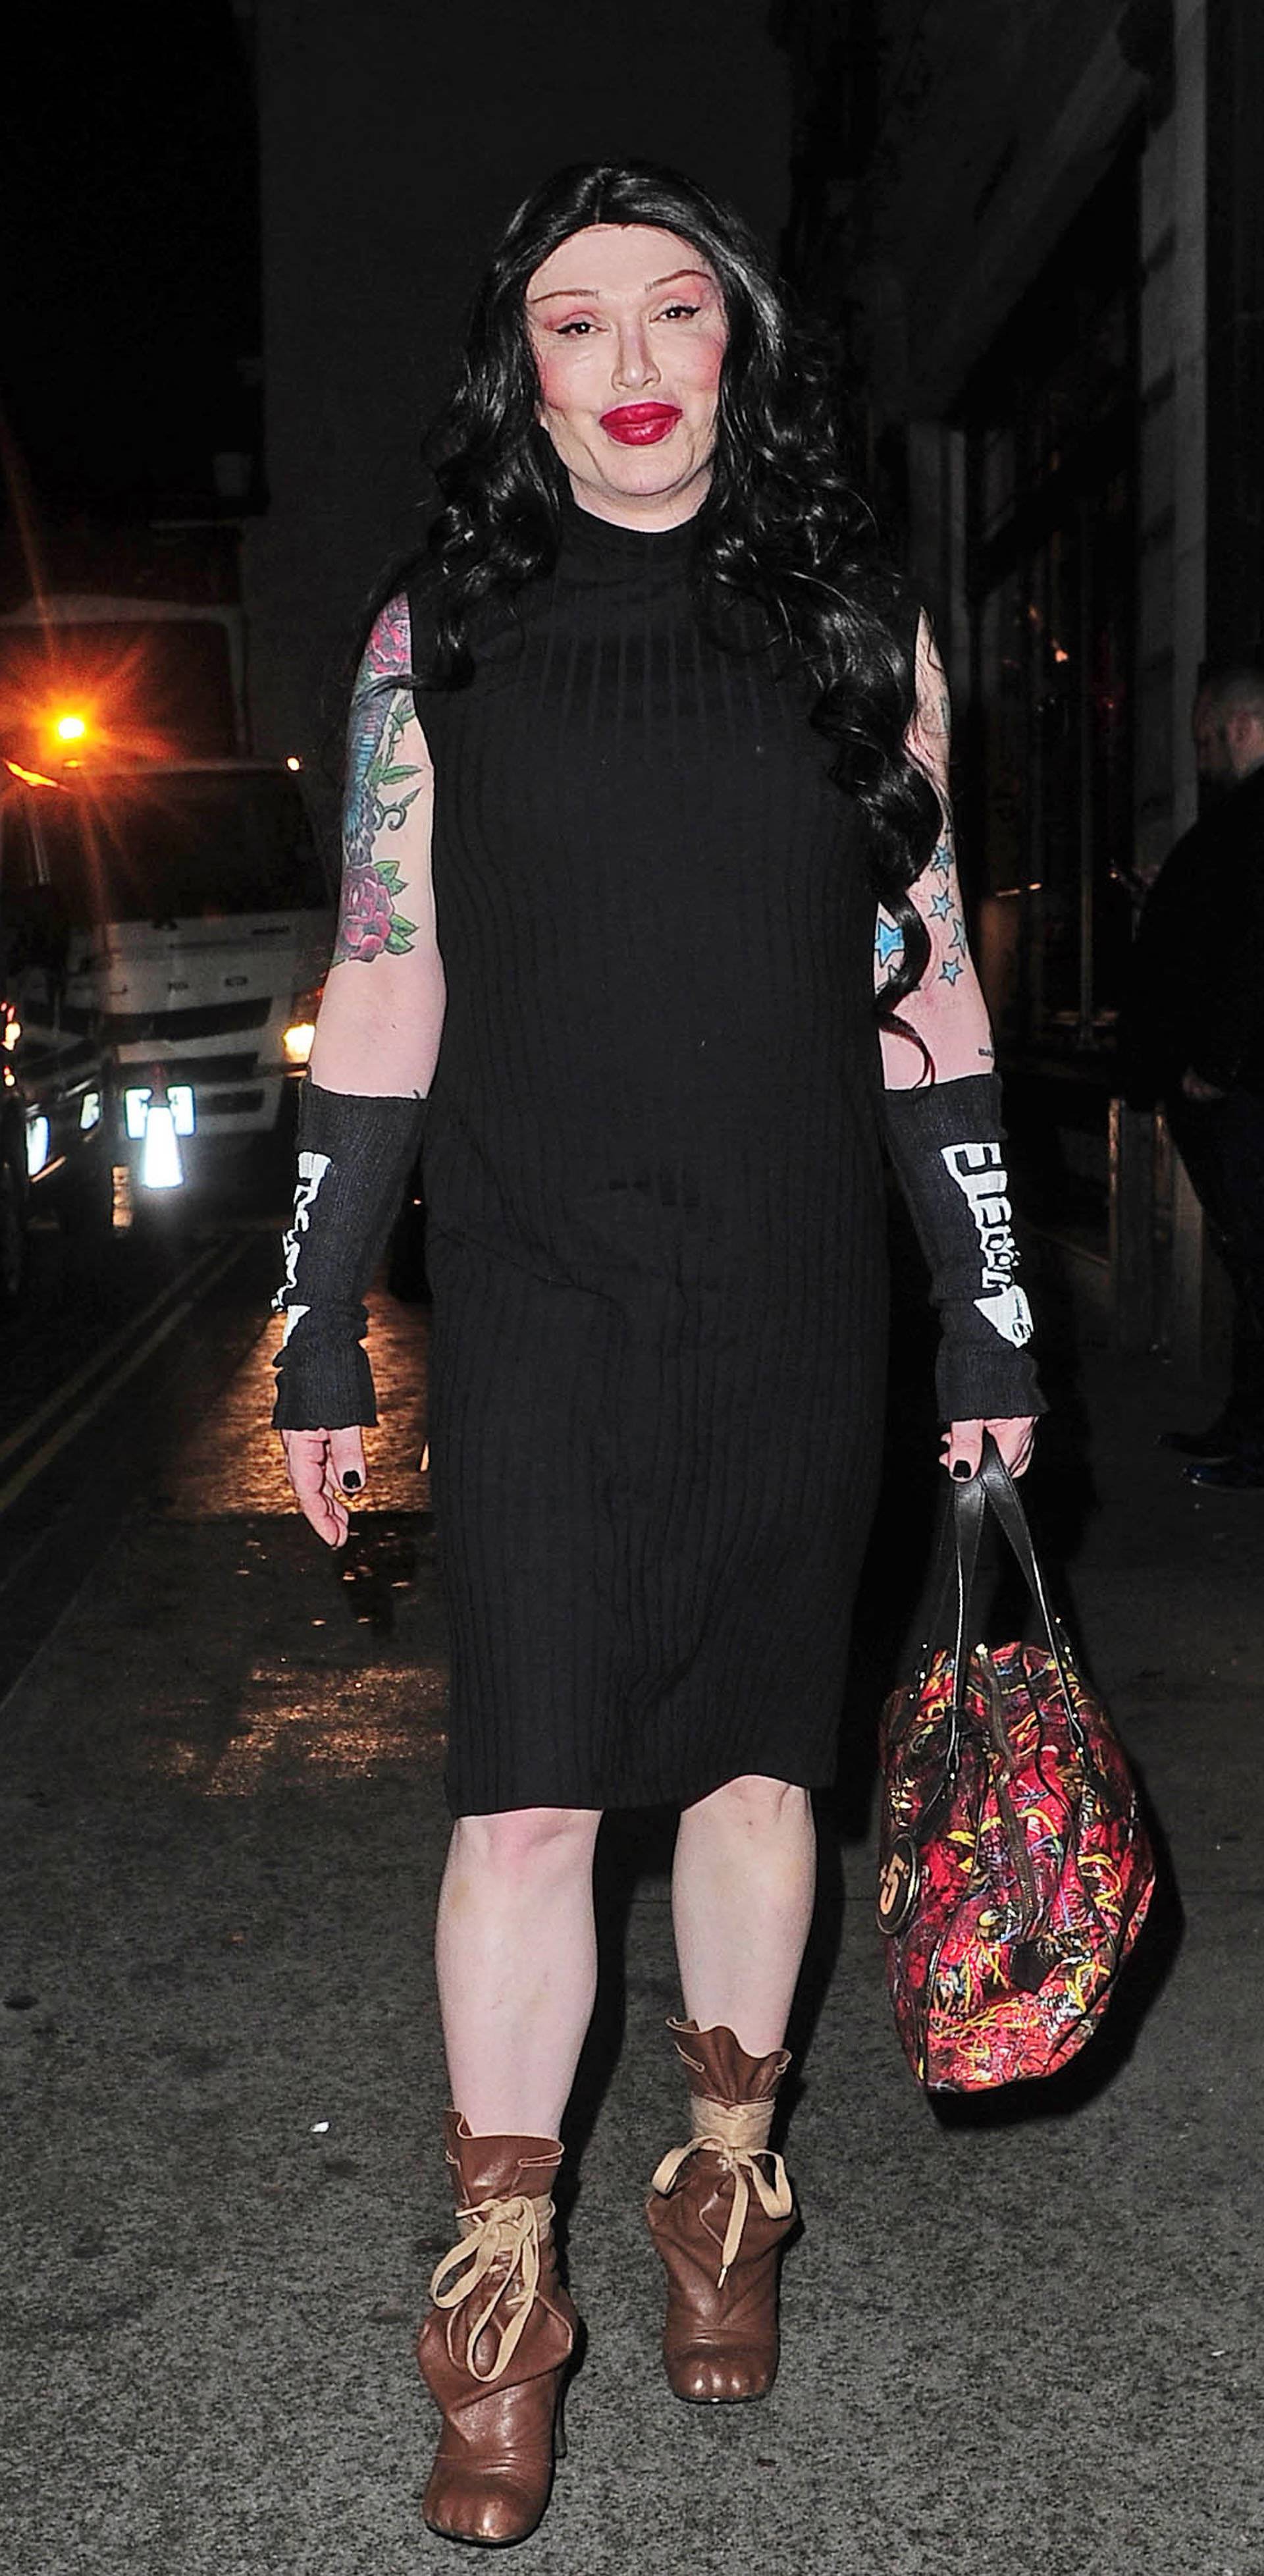 **PETE BURNS HAS DIES AT THE AGE OF 57 OF A REPORTED HEART ATTACK**